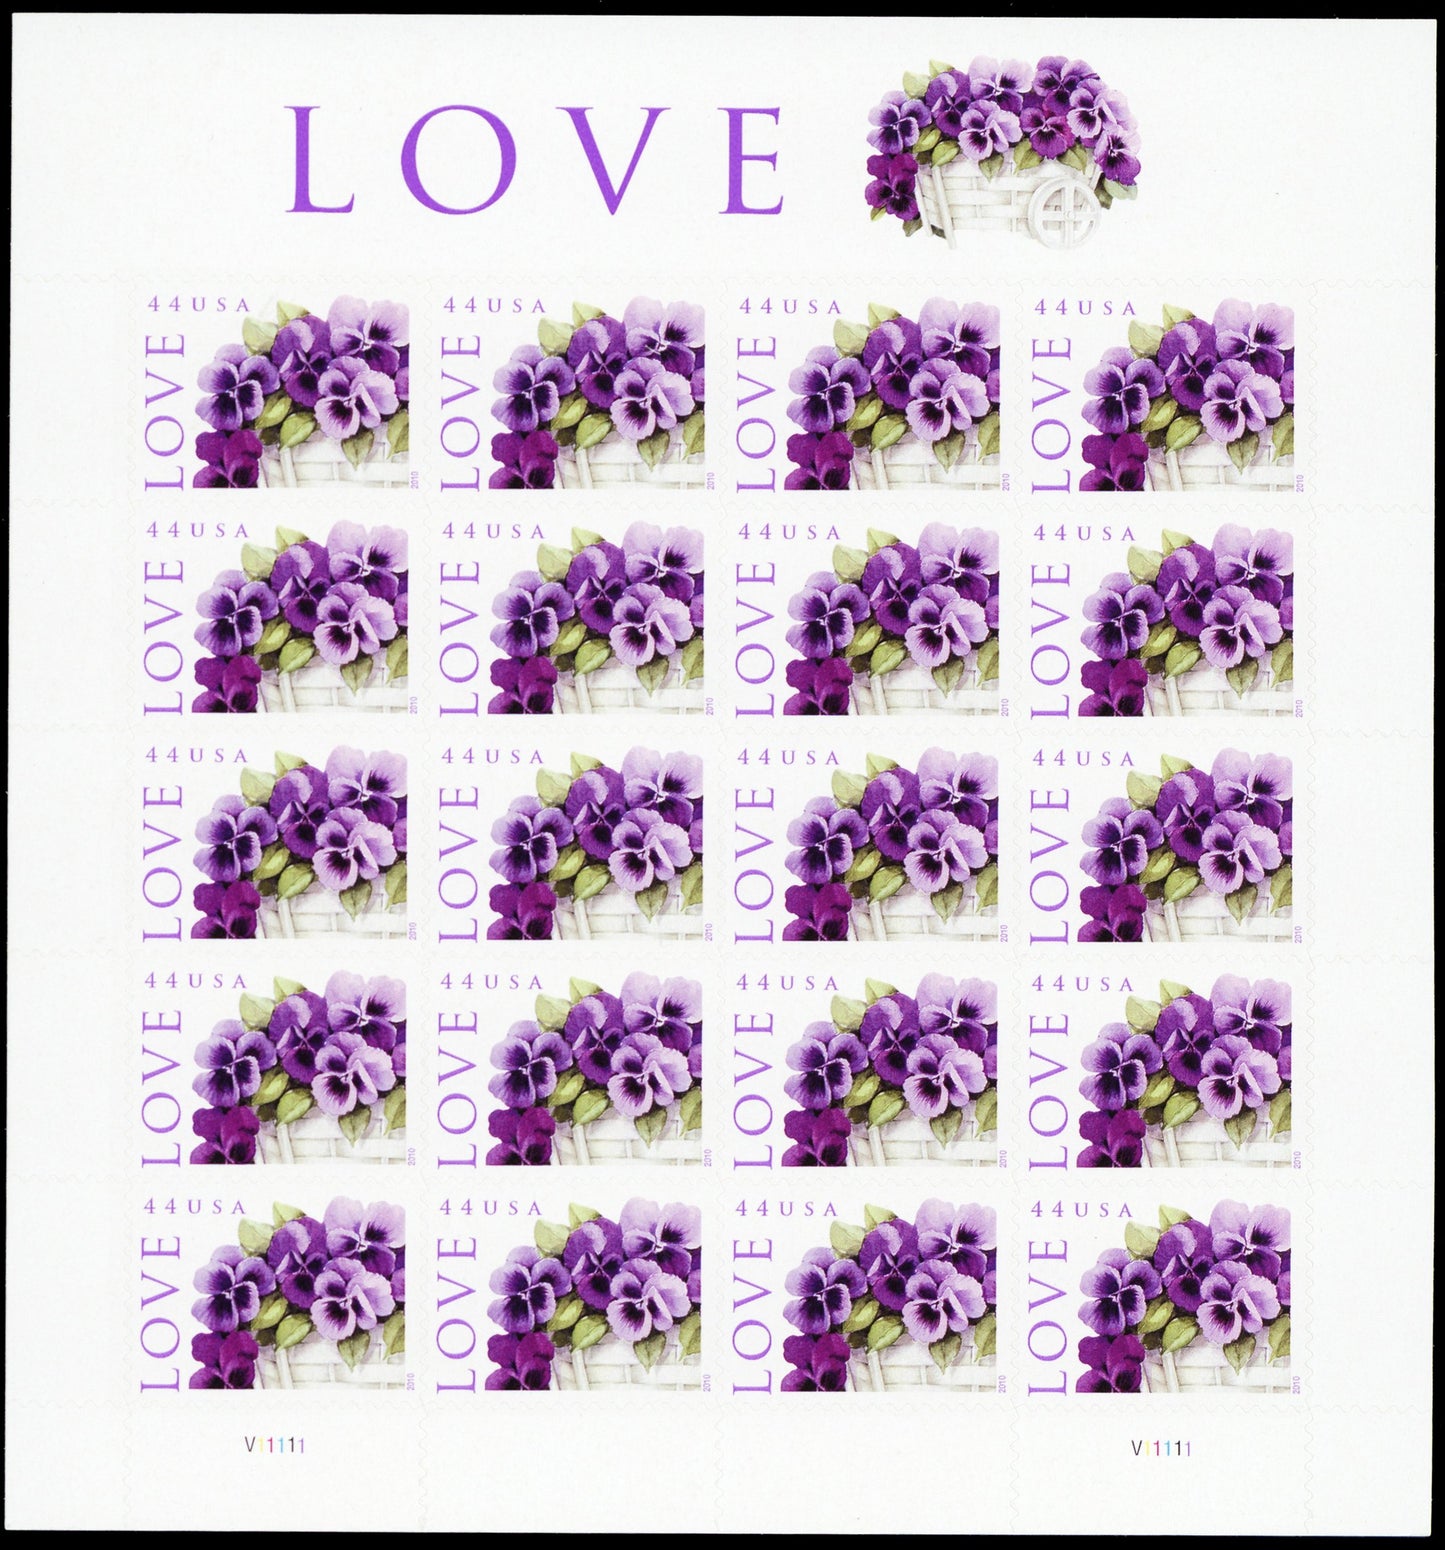 LOVE: Pansies in a Basket Collectible Stamp Sheet of Twenty 44 Cent Stamps